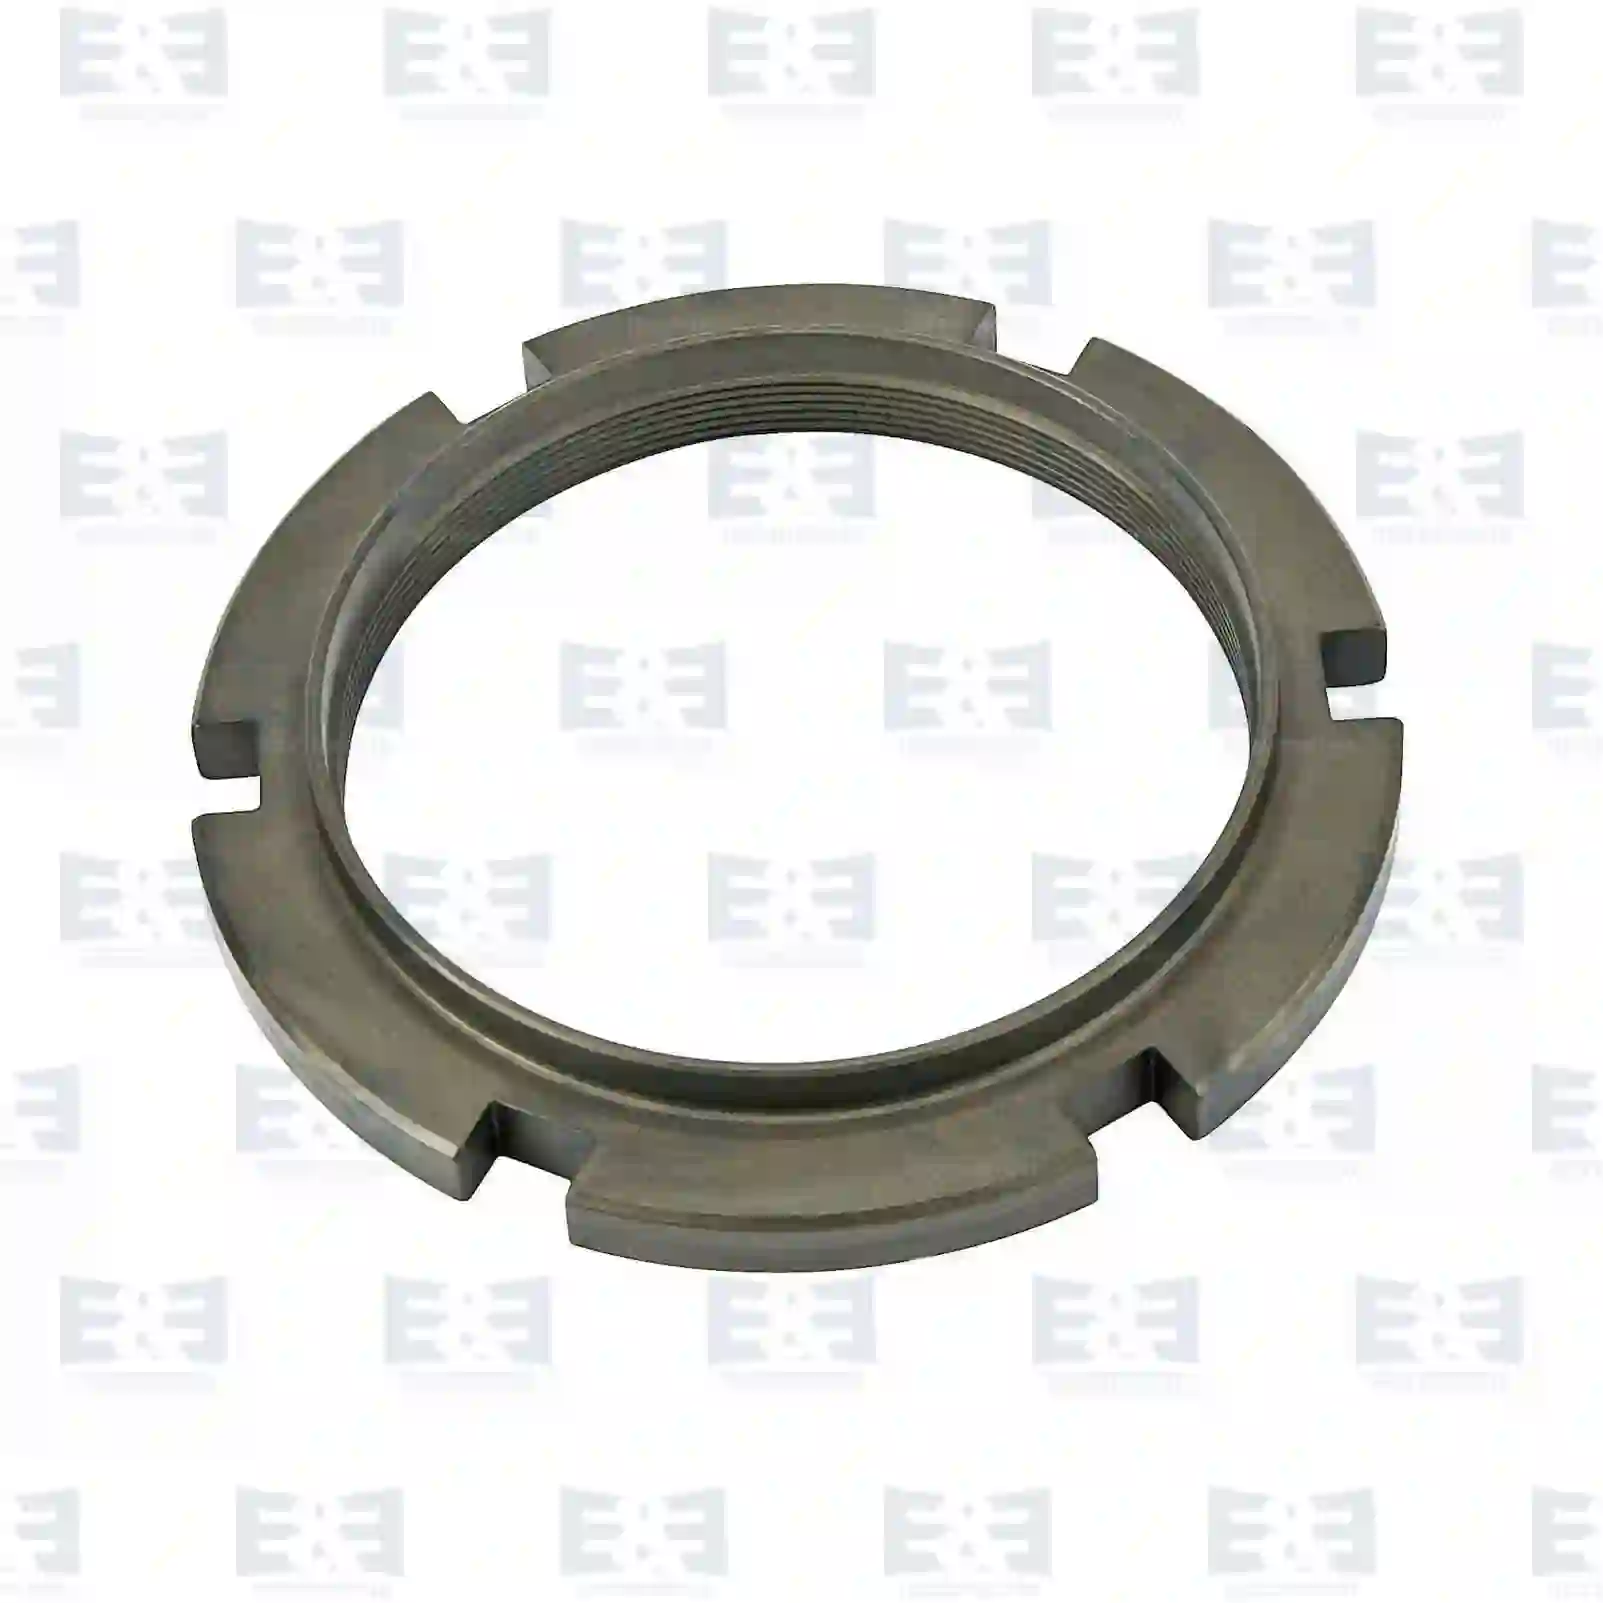  Grooved nut || E&E Truck Spare Parts | Truck Spare Parts, Auotomotive Spare Parts